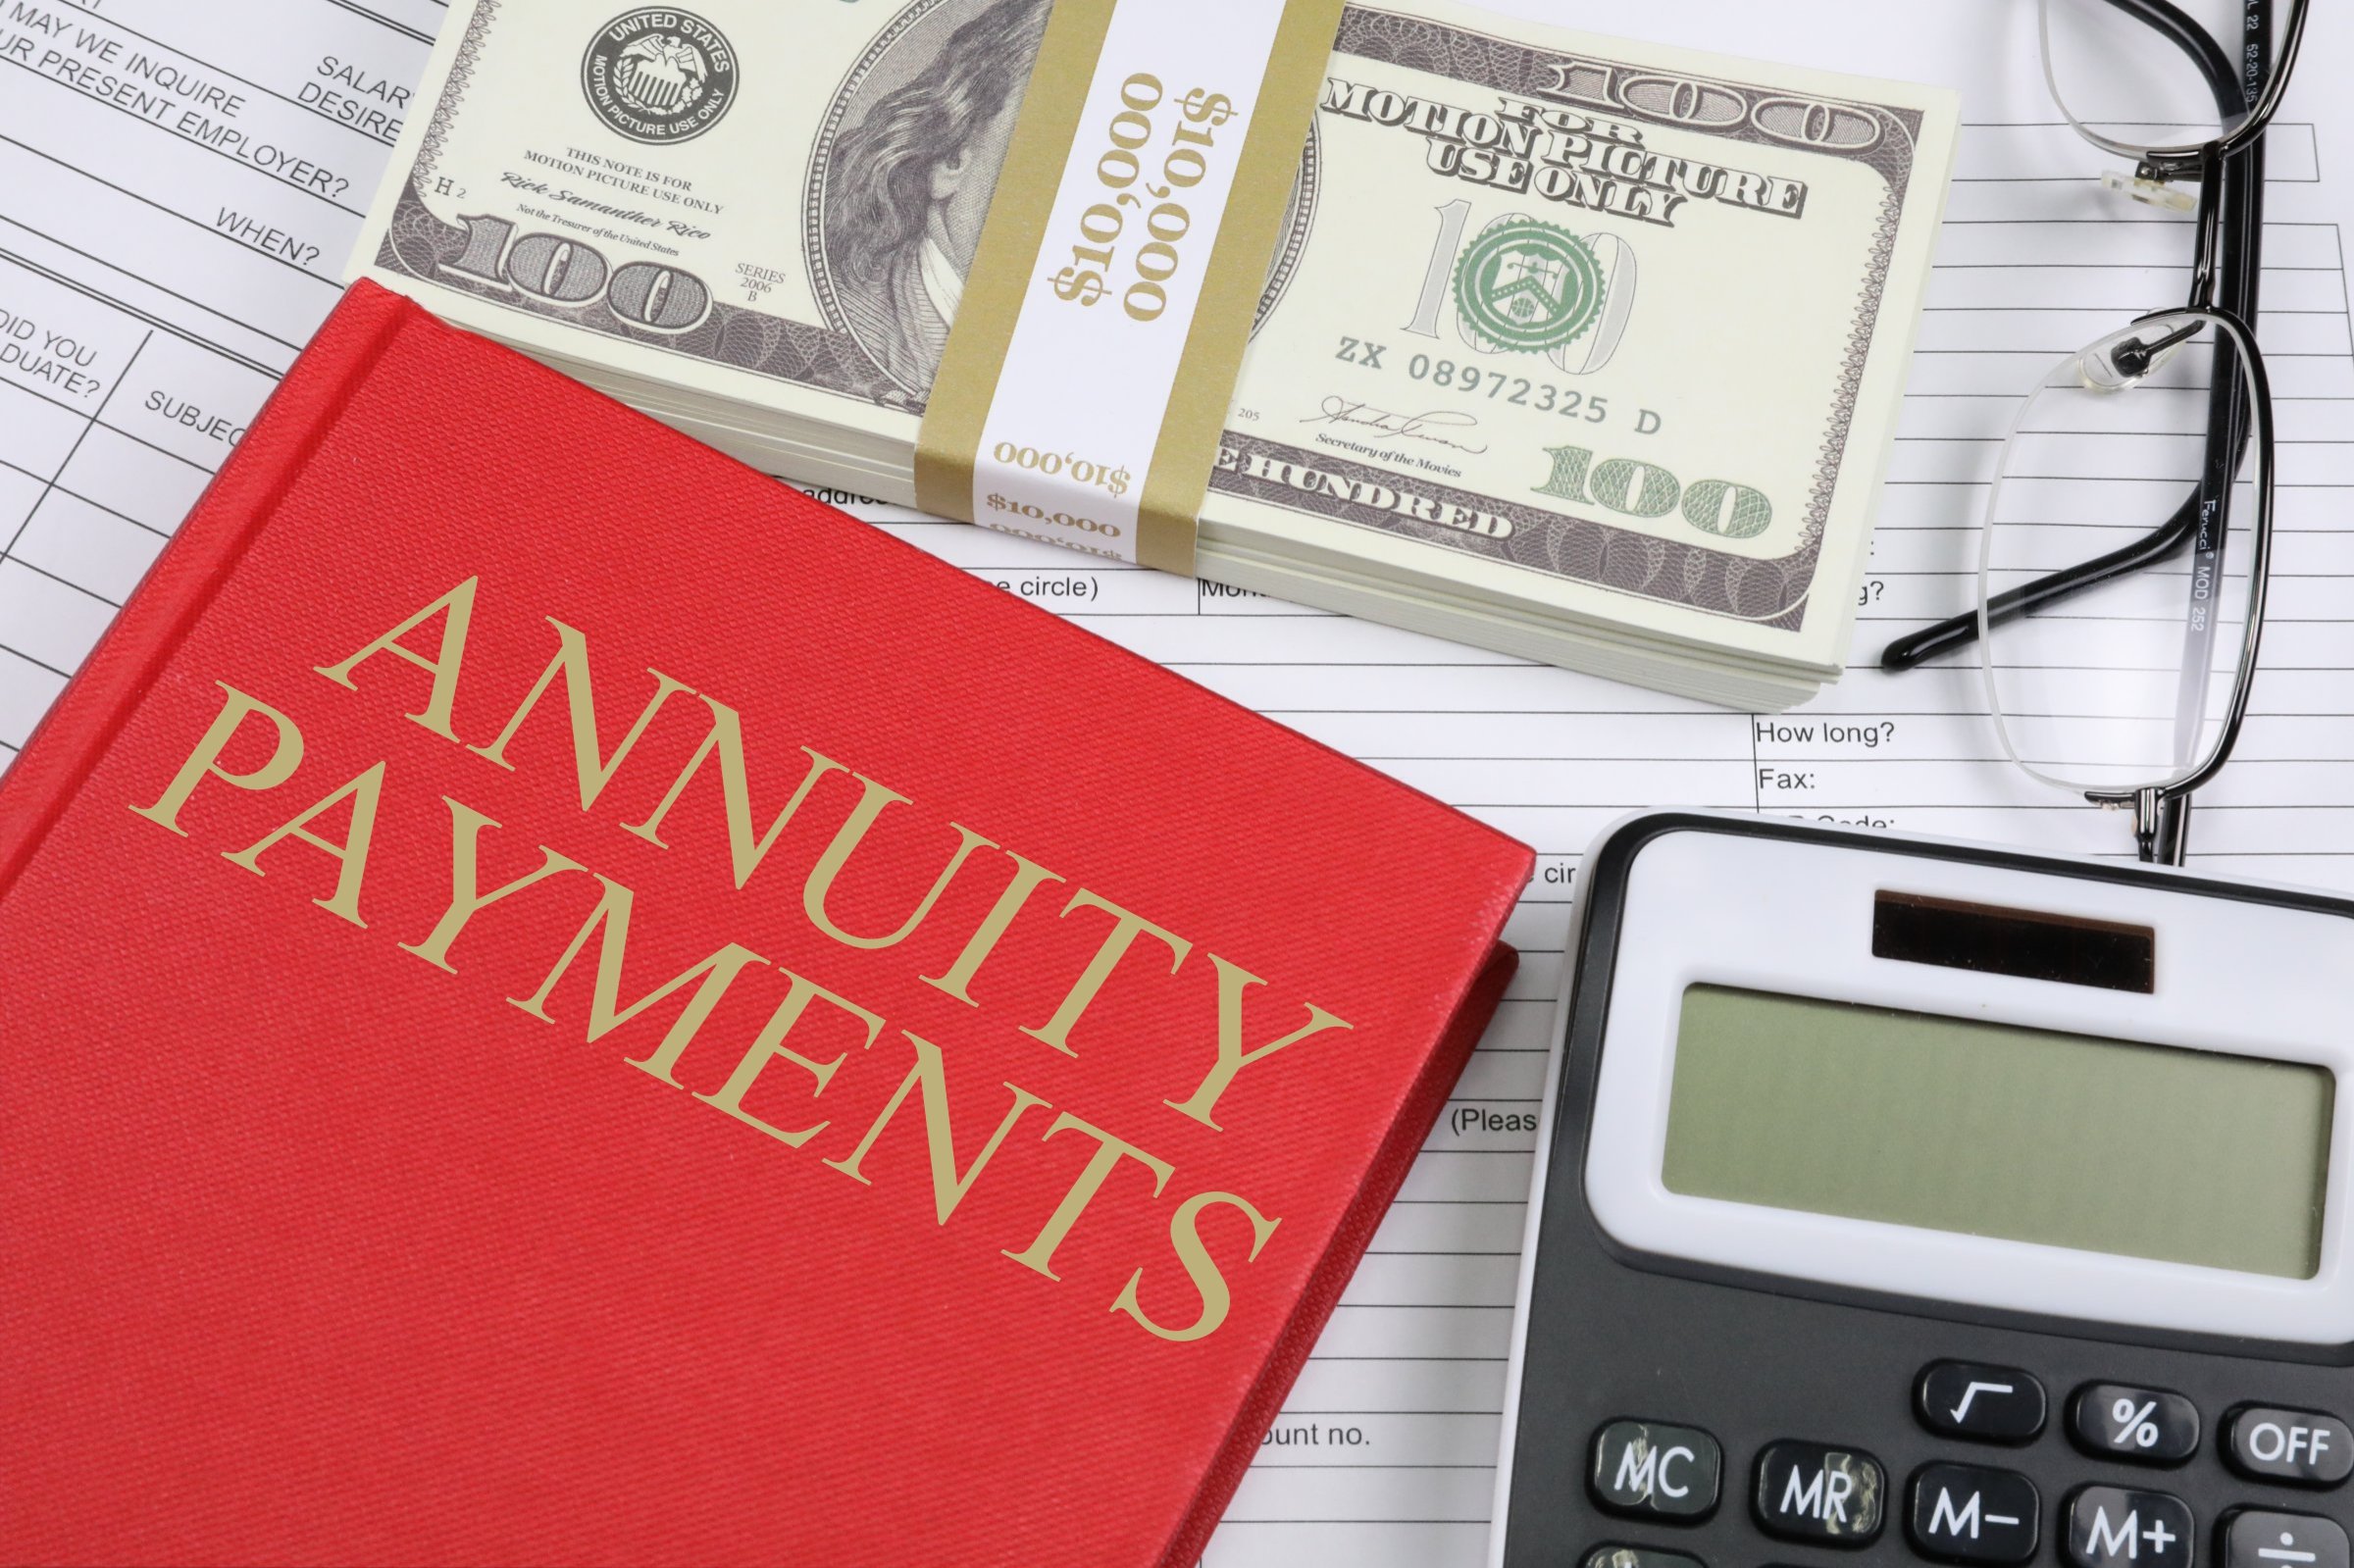 annuity payments